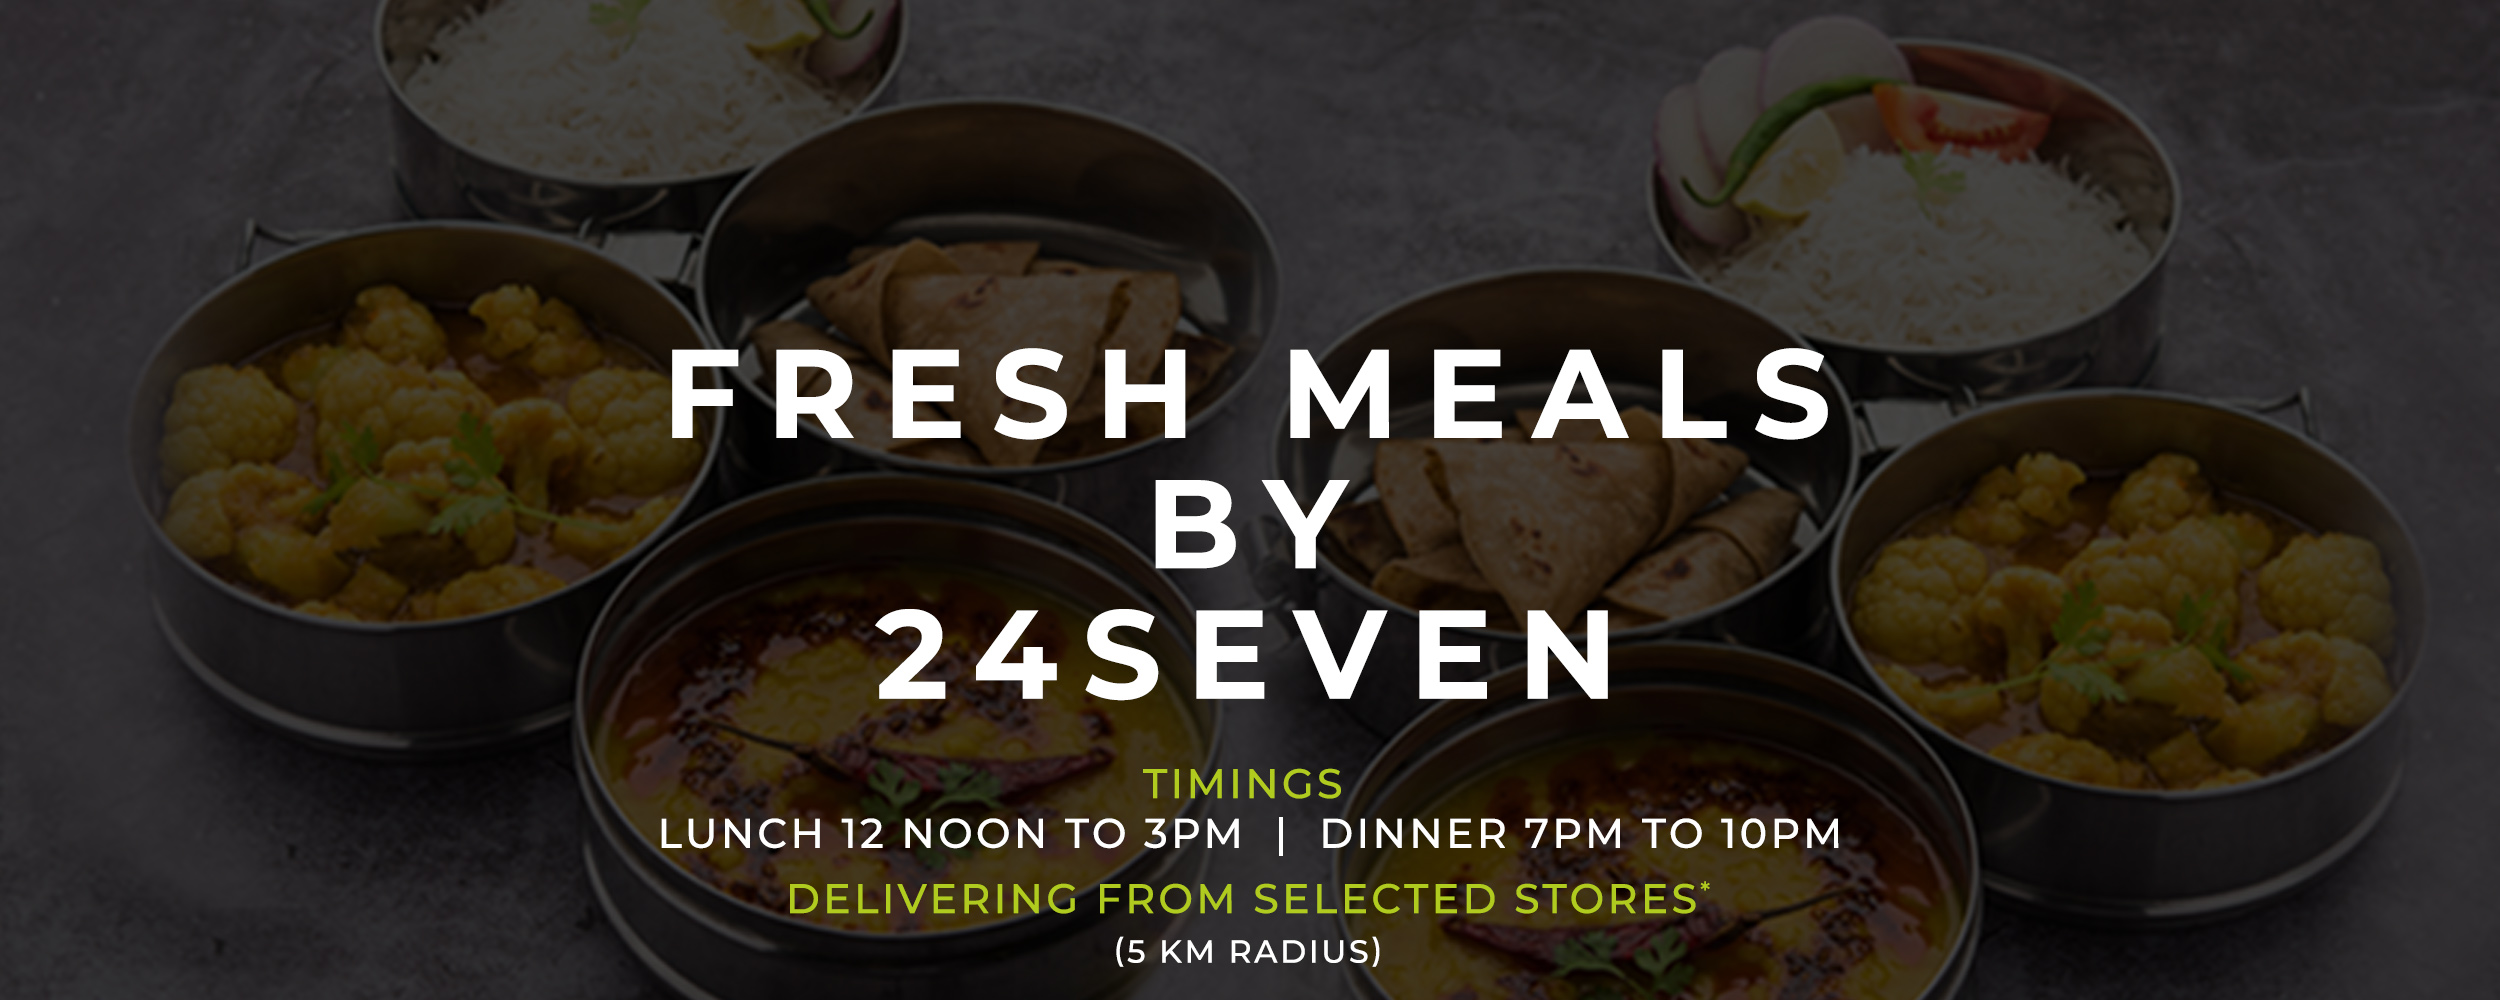 24SEVEN | Stores Near Me | Open 24 Hours